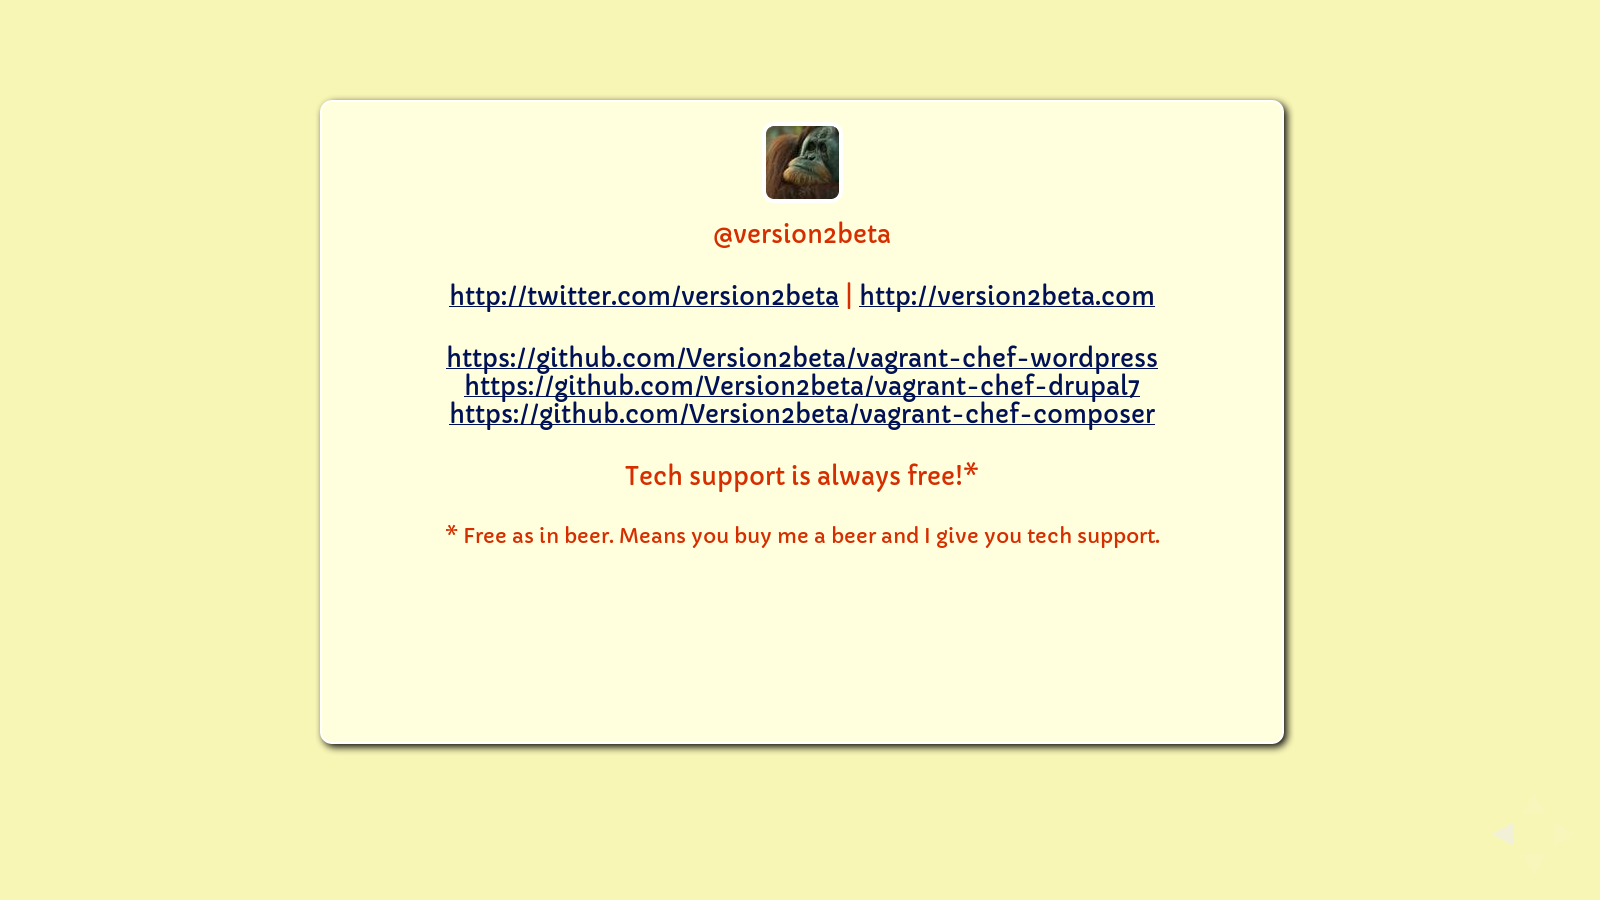 Slide: twitter, github contact info, "Free as in beer" tech support